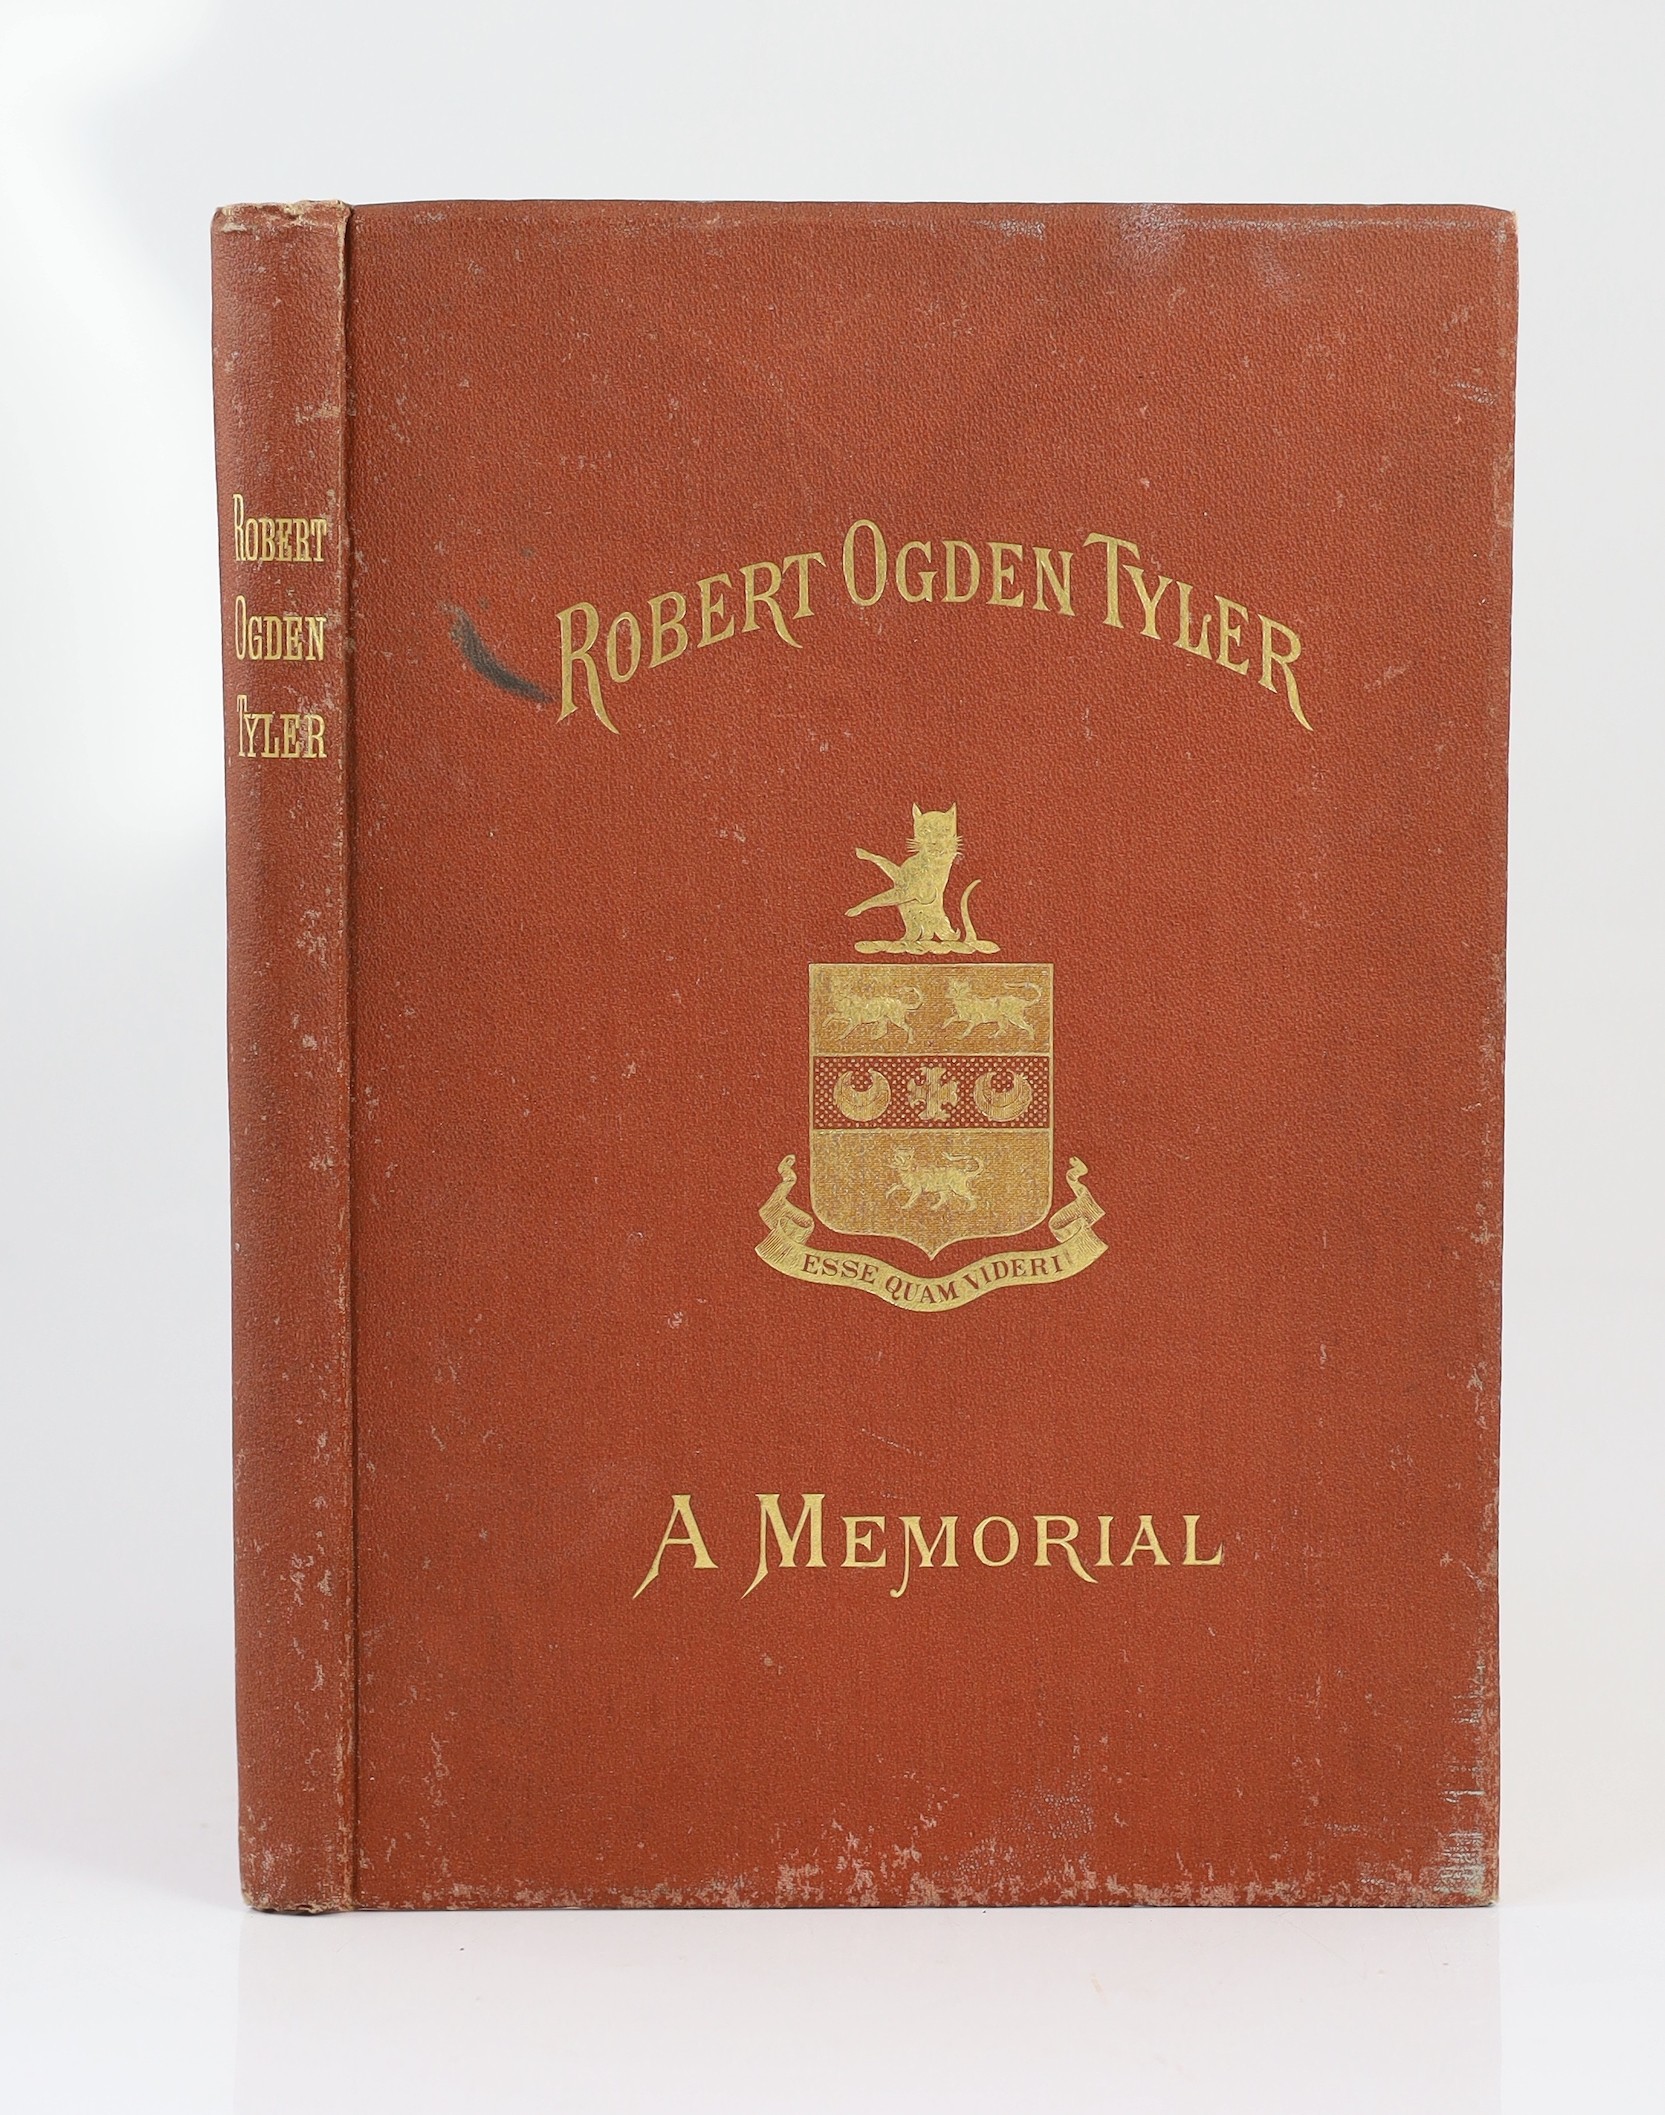 [Cullum, George W.] Memoir of Brevet Major-General Robert Ogden Tyler, U.S. Army, together with his Journal of Two Month's Travel in British and Farther India. portrait frontis; original gilt and armorial cloth, partly u